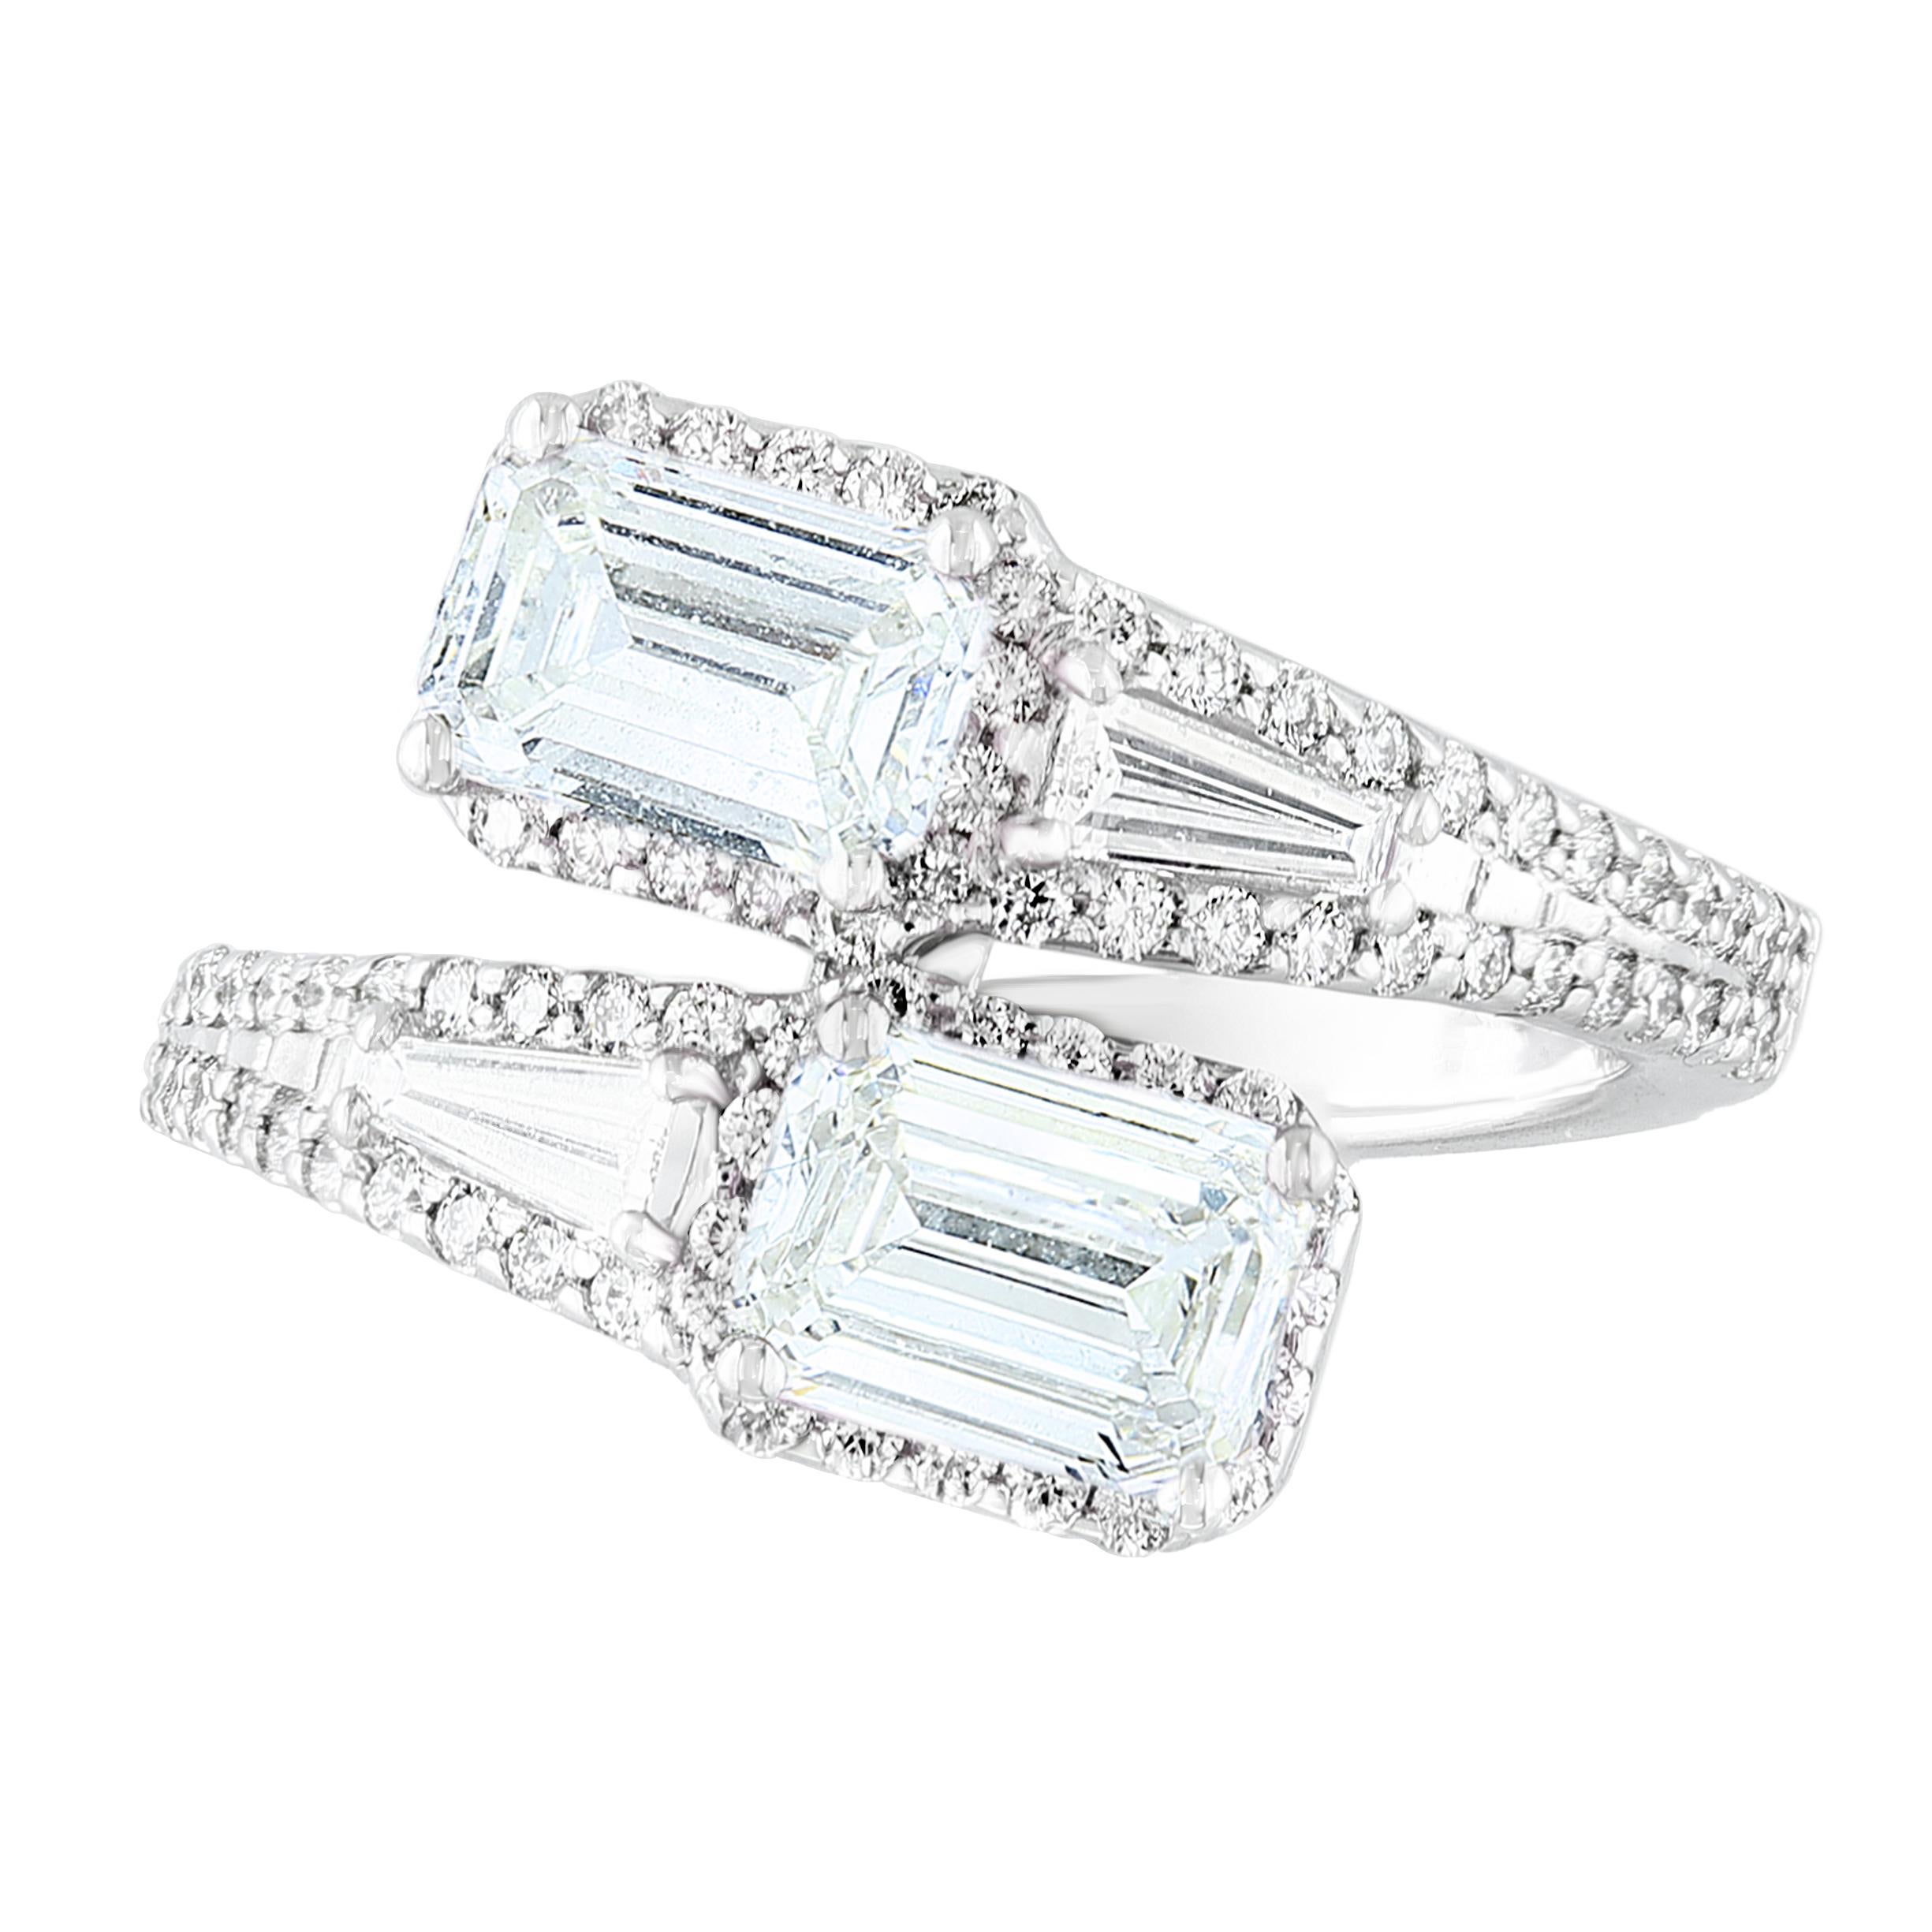 The stunning forever-together Toi et Moi ring features 2 Emerald cut Diamonds embraced by east to west 2 baguette diamonds weigh and 84 round diamonds halfway to the shank. Handcrafted in 14k White Gold.
2 emerald cut Diamonds in the center weigh